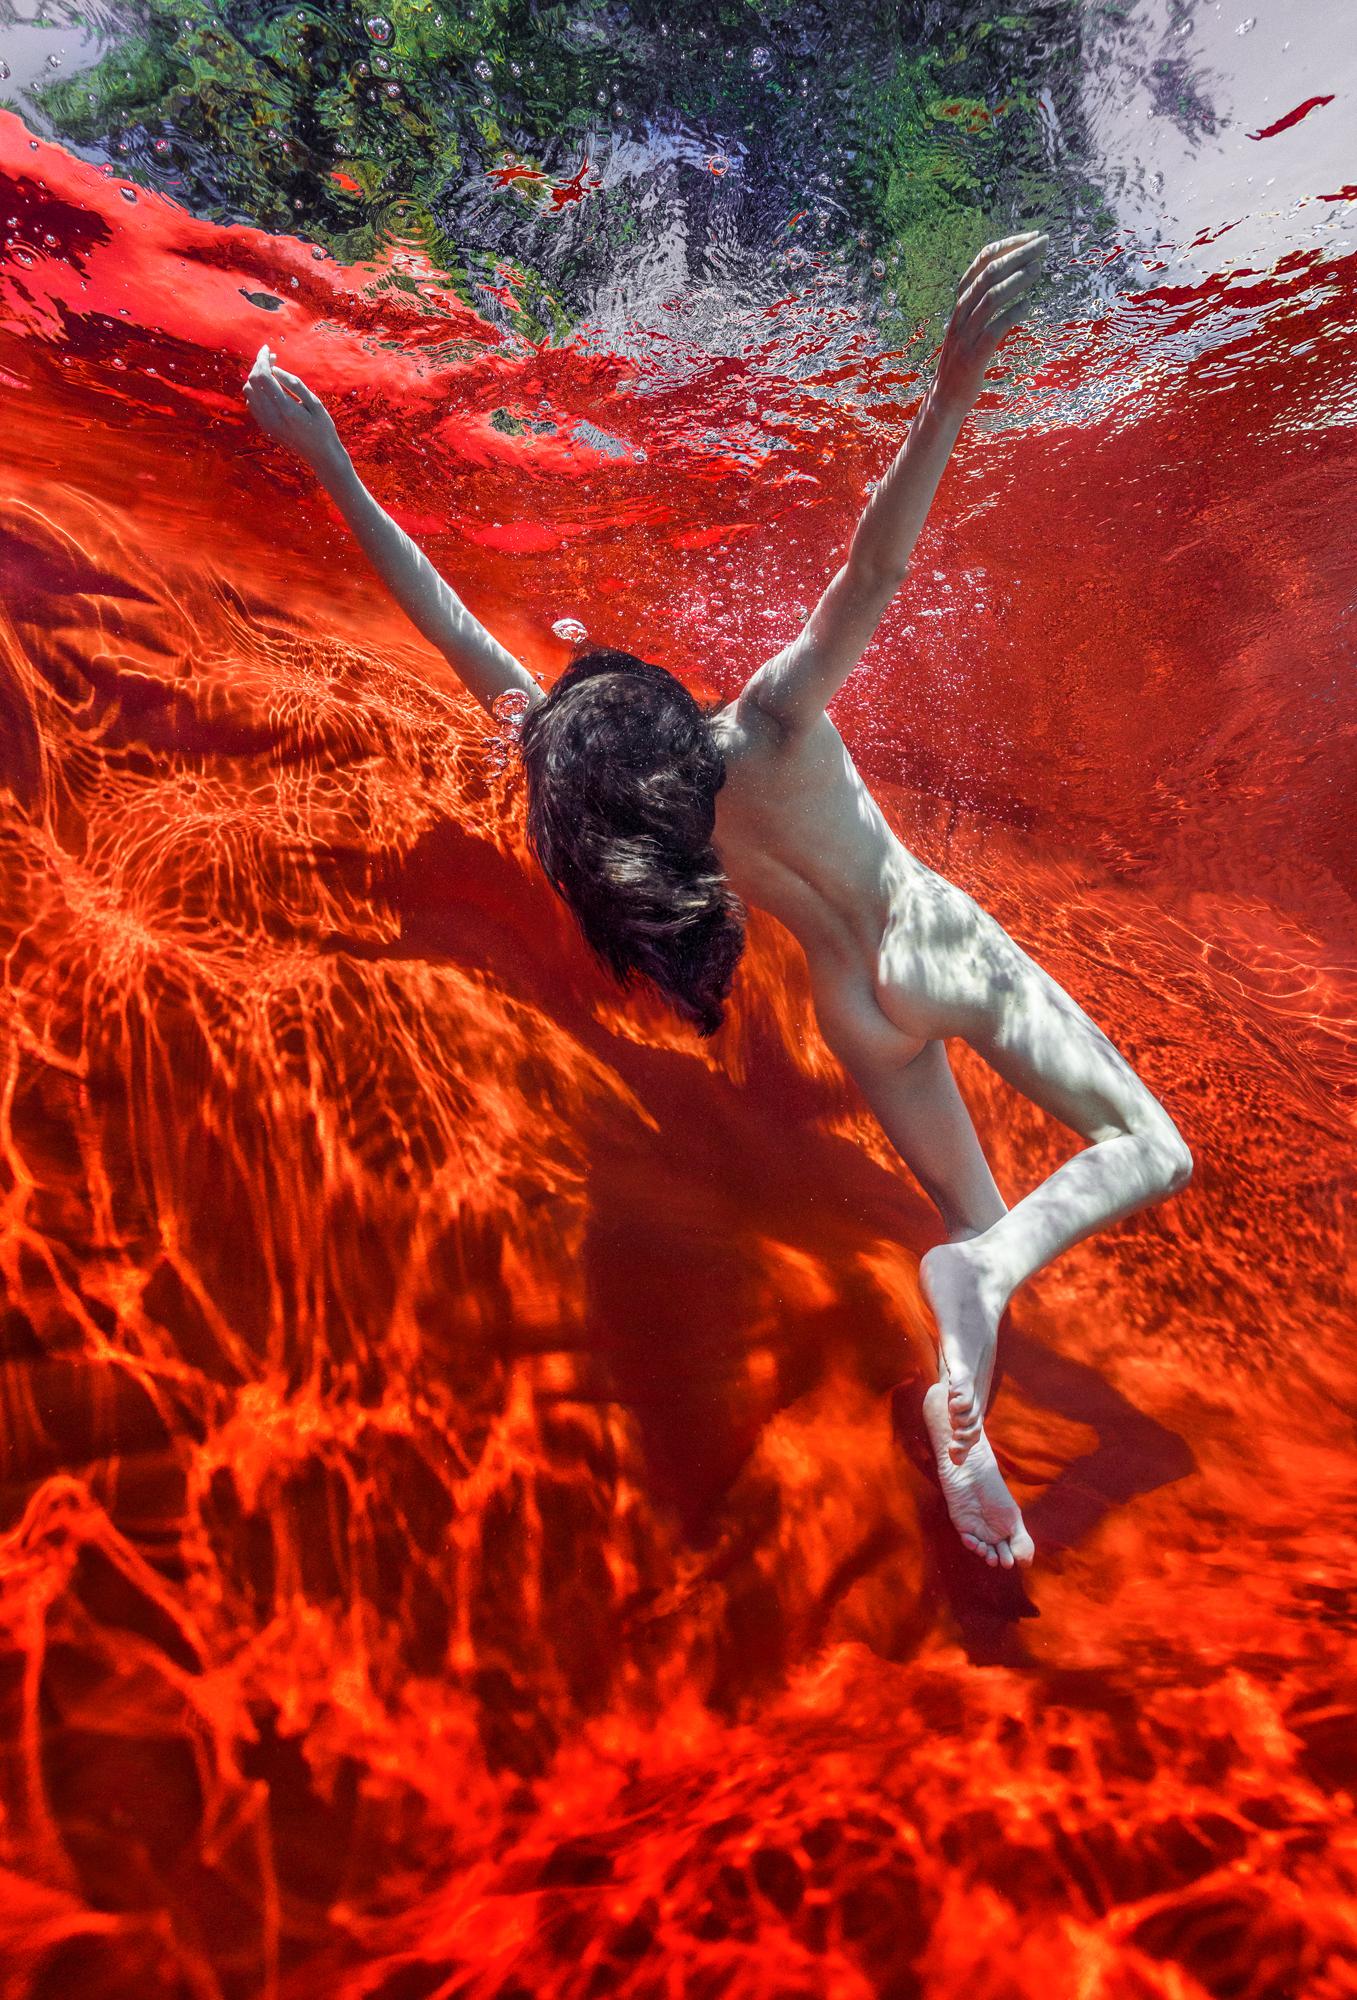 Alex Sher Color Photograph - Hot Water - underwater nude photograph - print on aluminum 36" x 24"